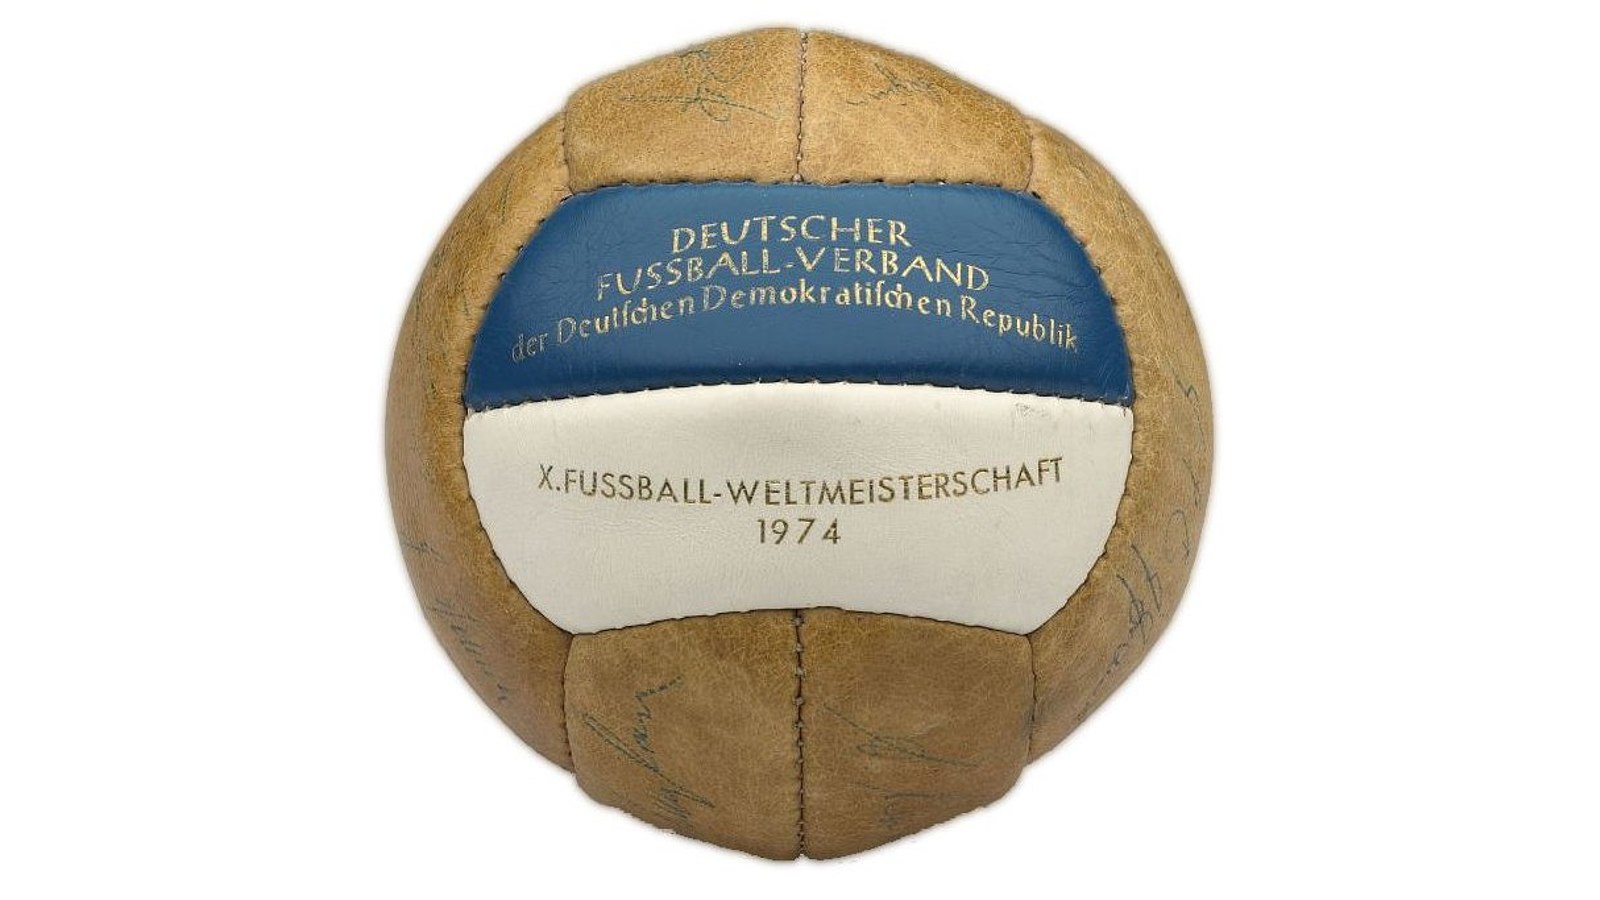 Football with autographs of the GDR World Cup Team 1974